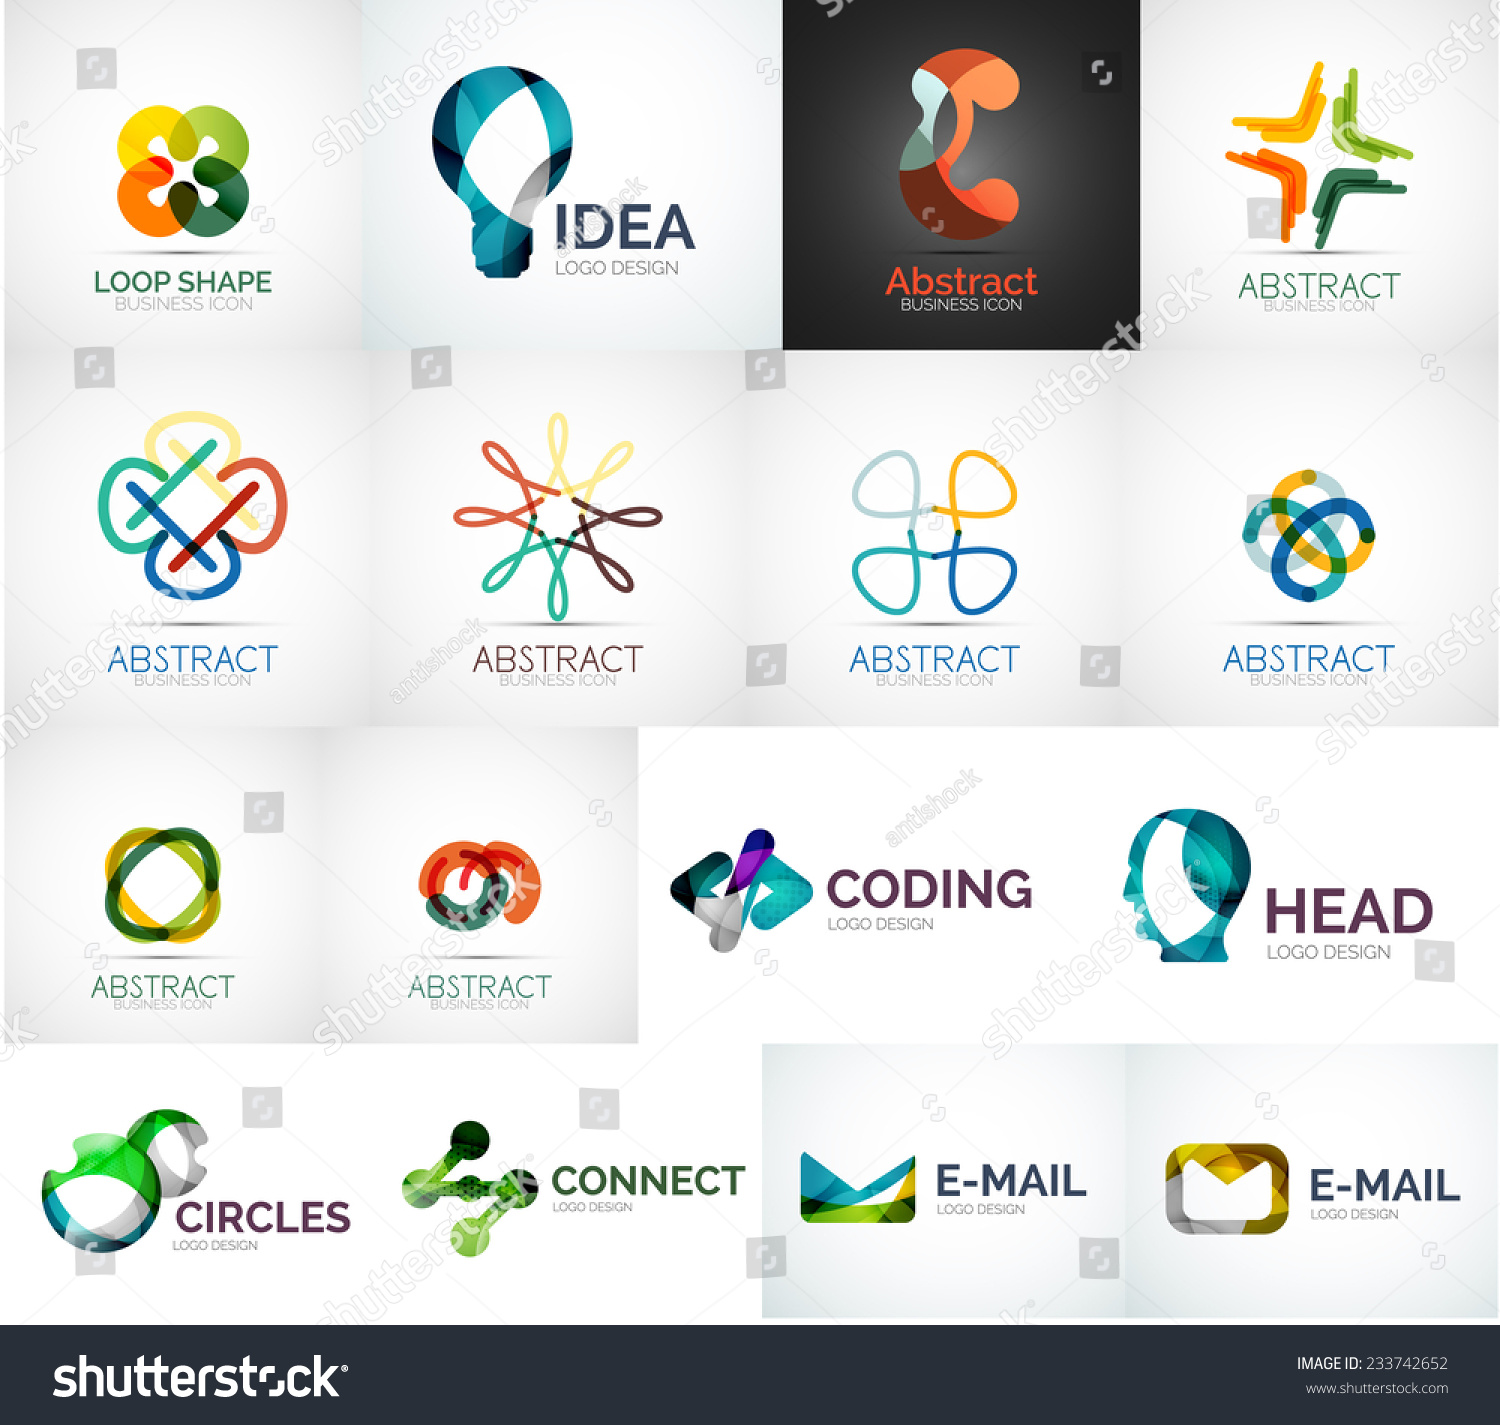 Abstract Company Logo Vector Collection - 16 Modern Various Business ...